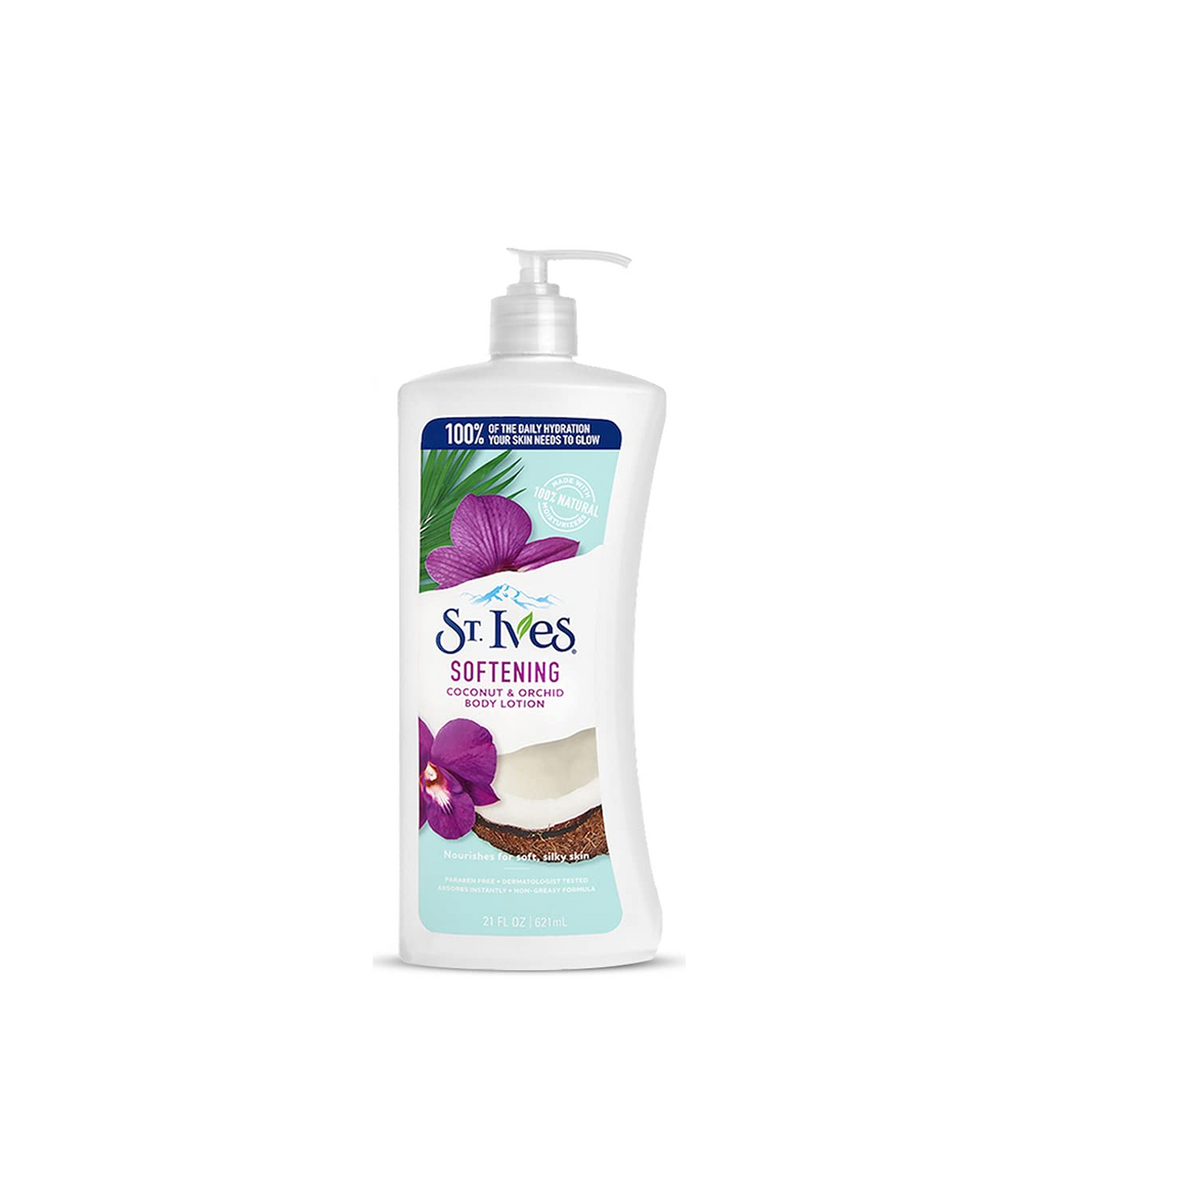 st-ives-softening-coconut-orchid-body-lotion-621ml